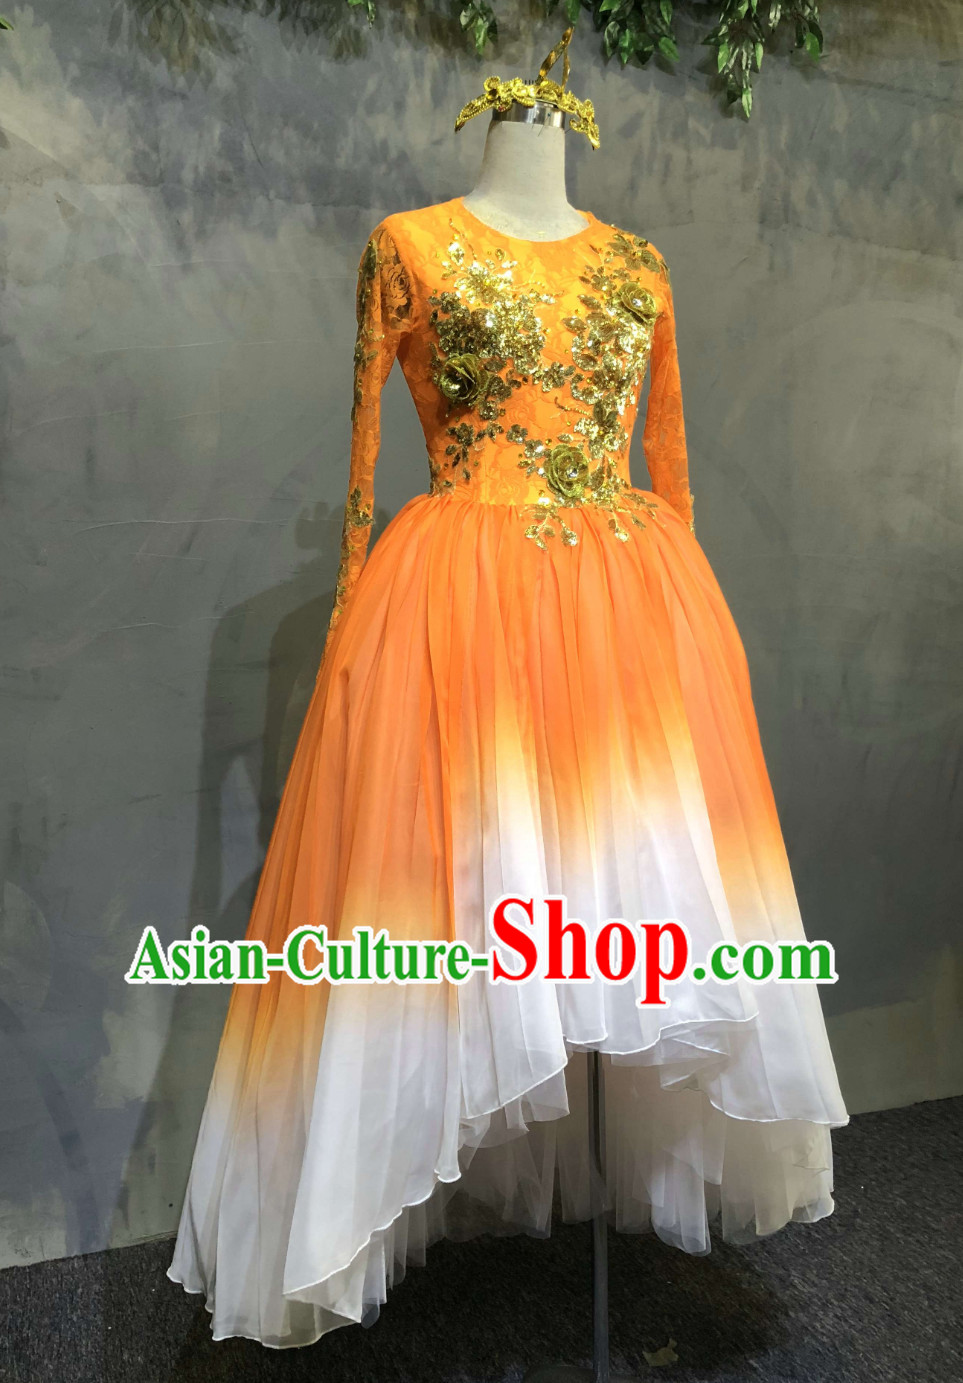 Custom Made Tailor Made Custom-made Color Transition Dance Costumes